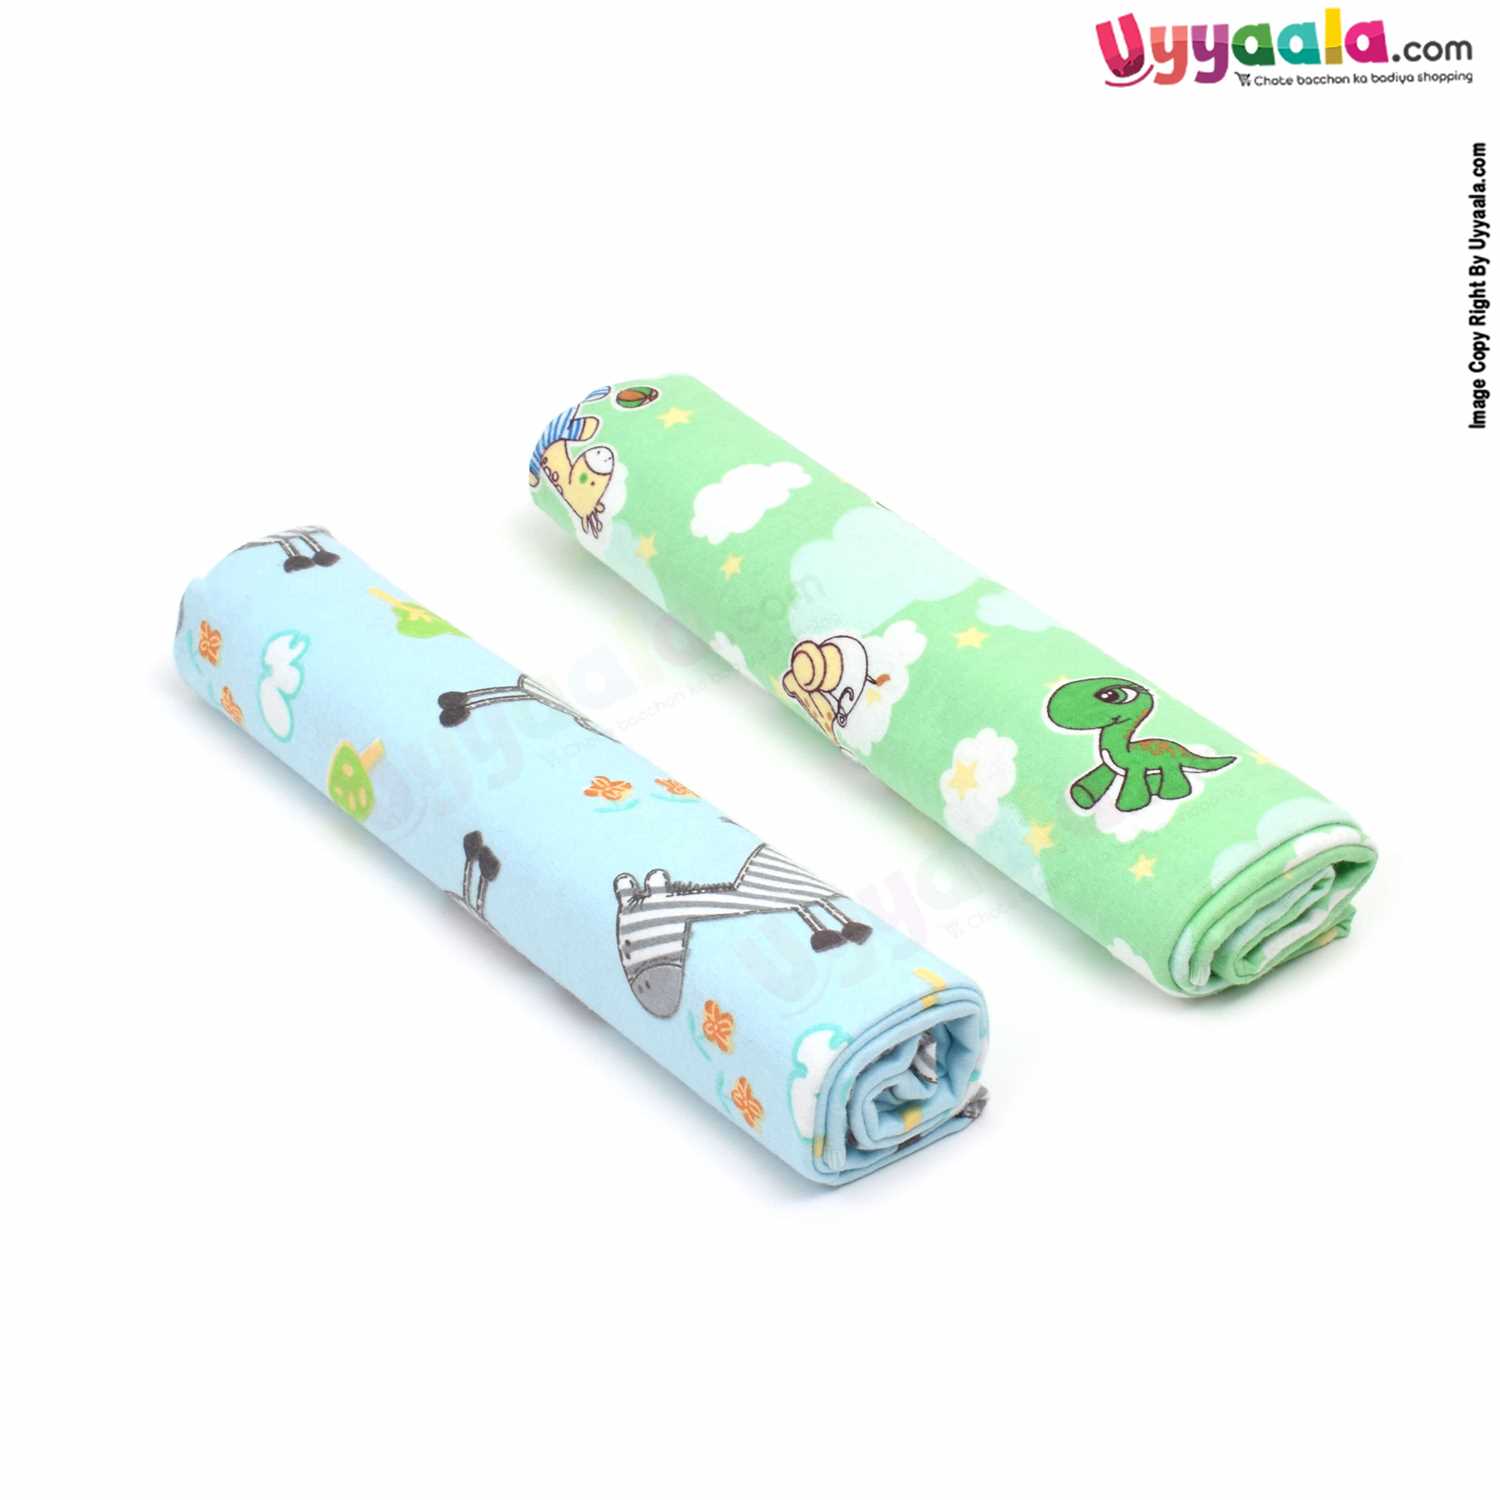 DARLING Baby Bath Towel 100% Cotton with Animals & Stars Print Pack of 2 0+m Age ,Size (100*75cm) - Green & Blue